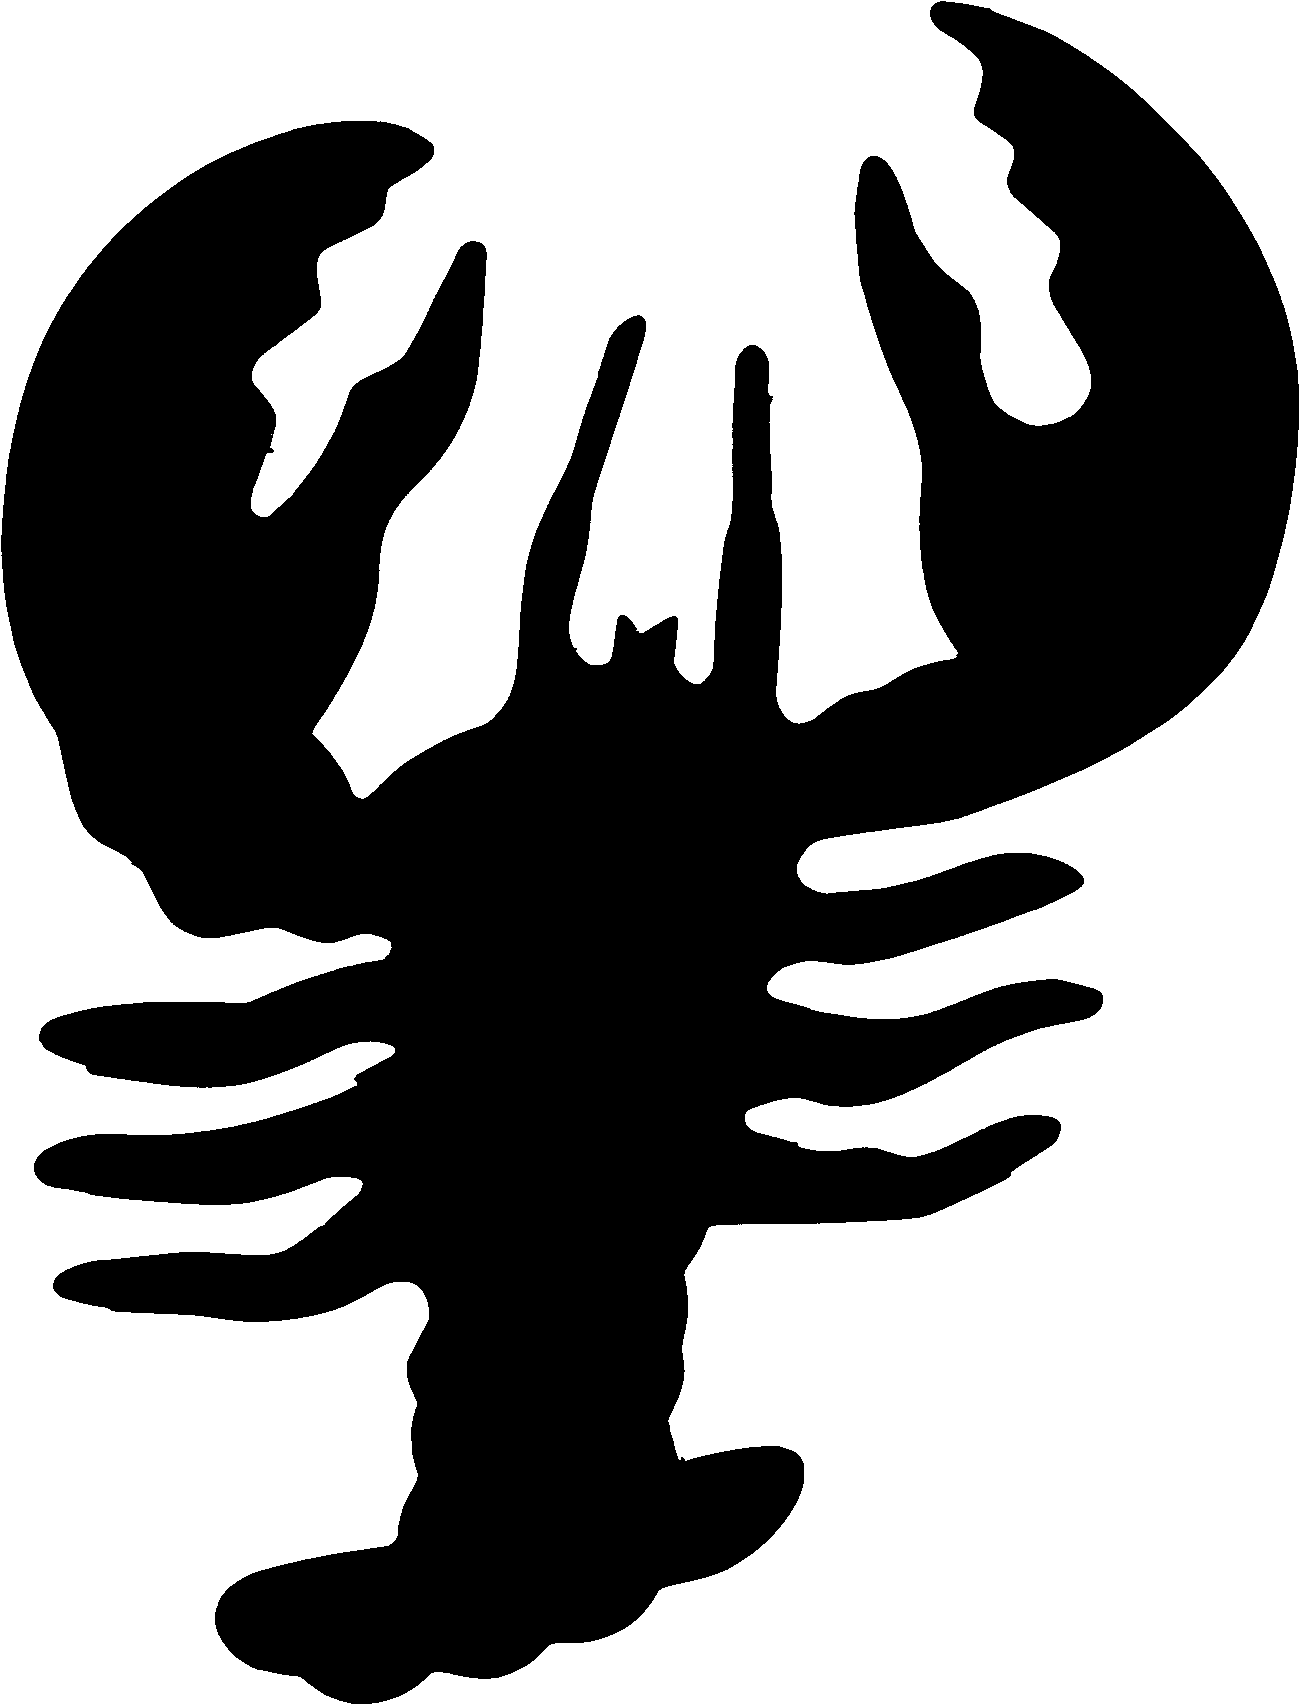 Lobster Clipart Black And White   Clipart Panda   Free Clipart Images